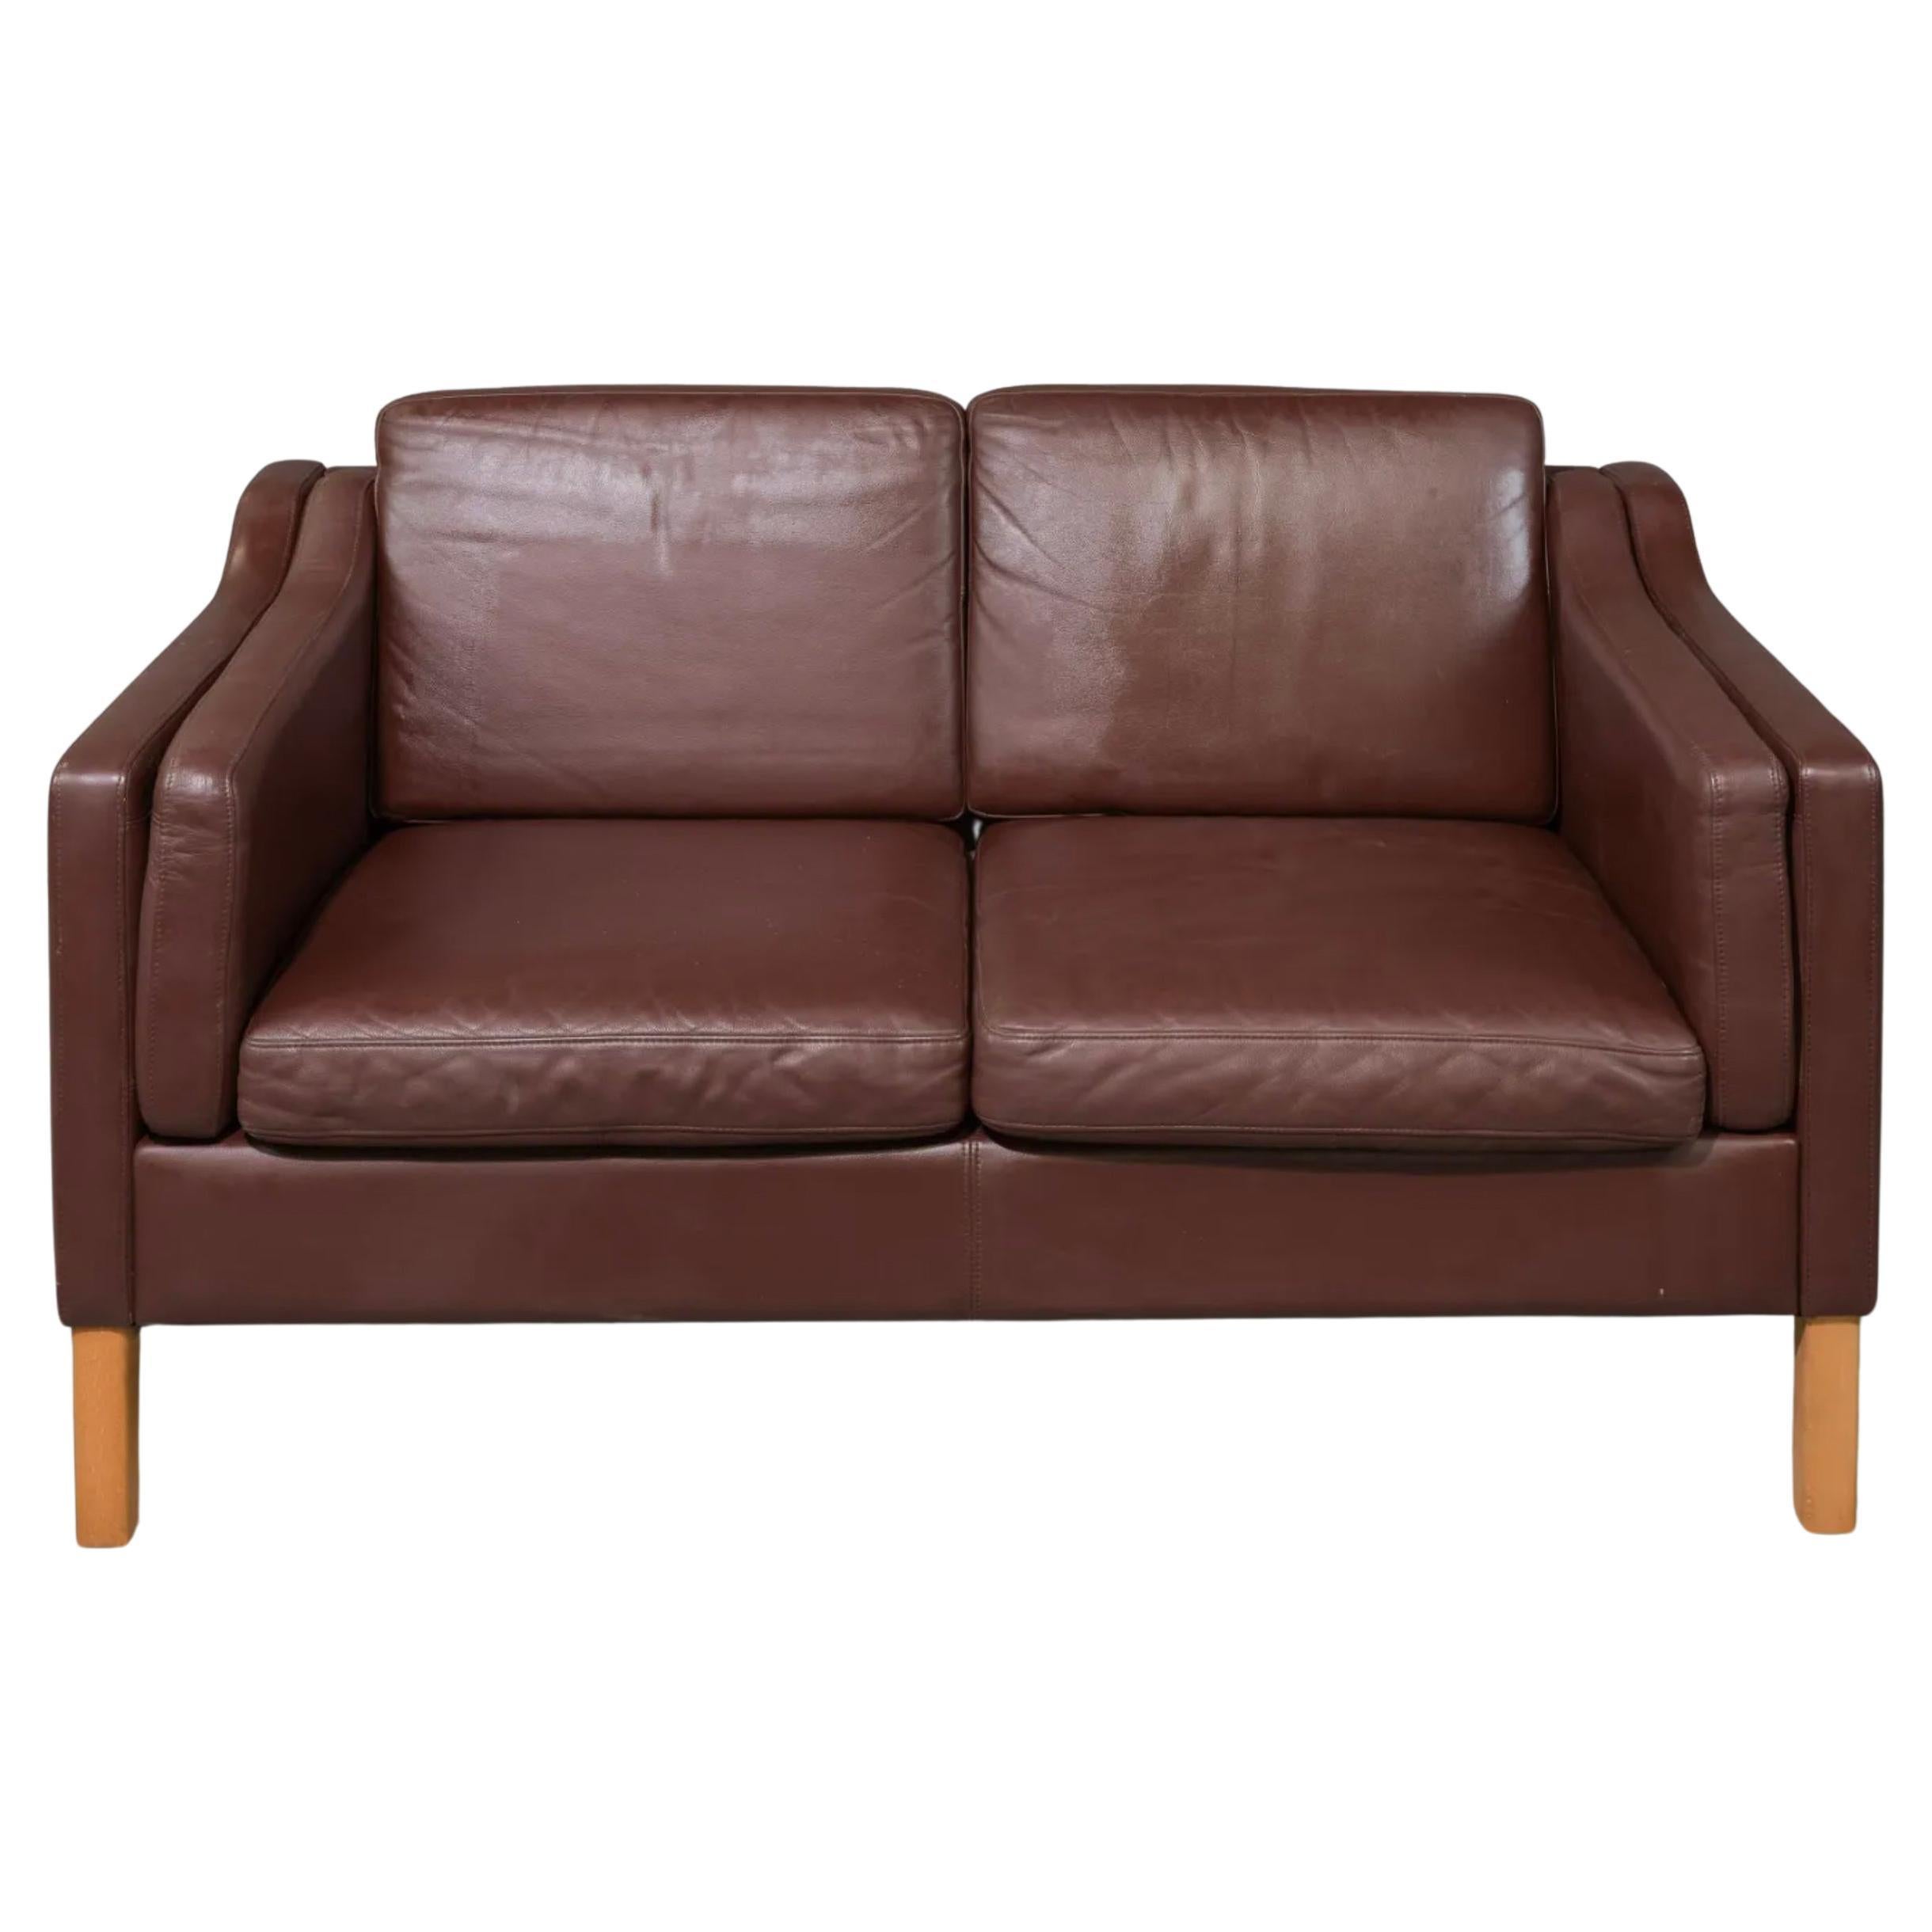 Danish modern brown leather 2 seat sofa with birch legs style of Børge Mogensen For Sale